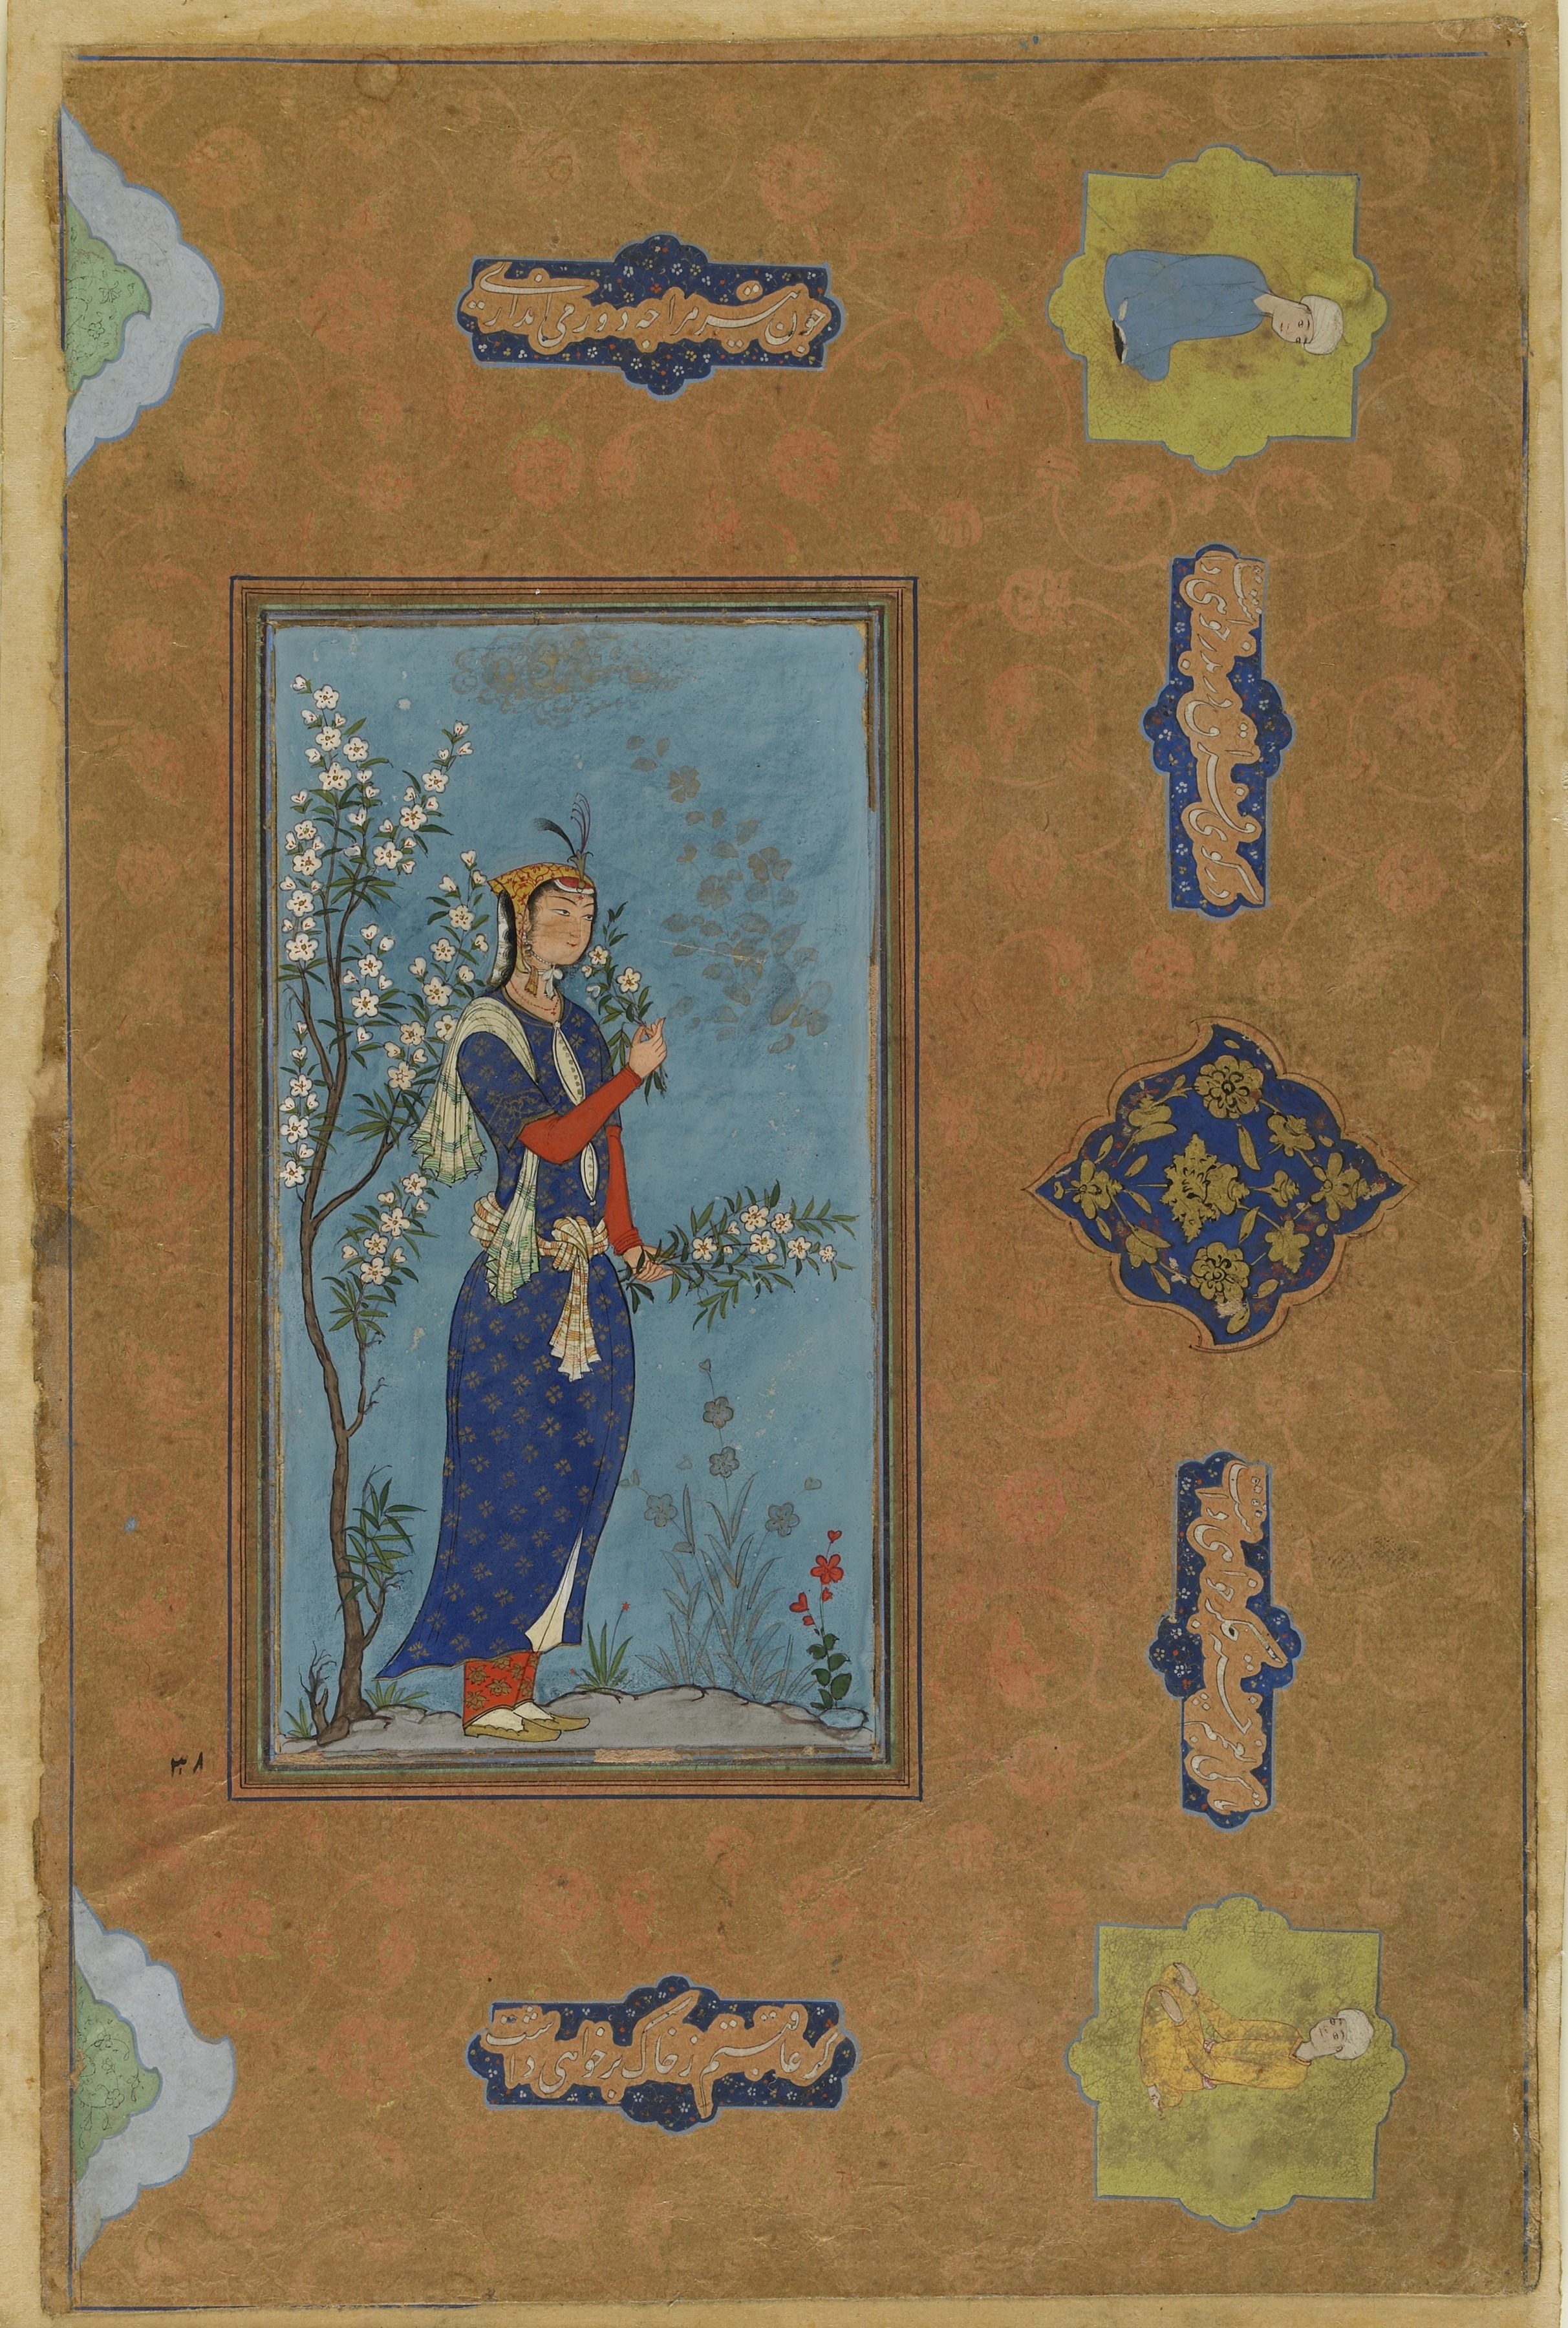 Woman with a Spray of Flowers by Unknown Artist - ca. 1575 - 29.4 × 19.4 cm National Museum of Asian Art